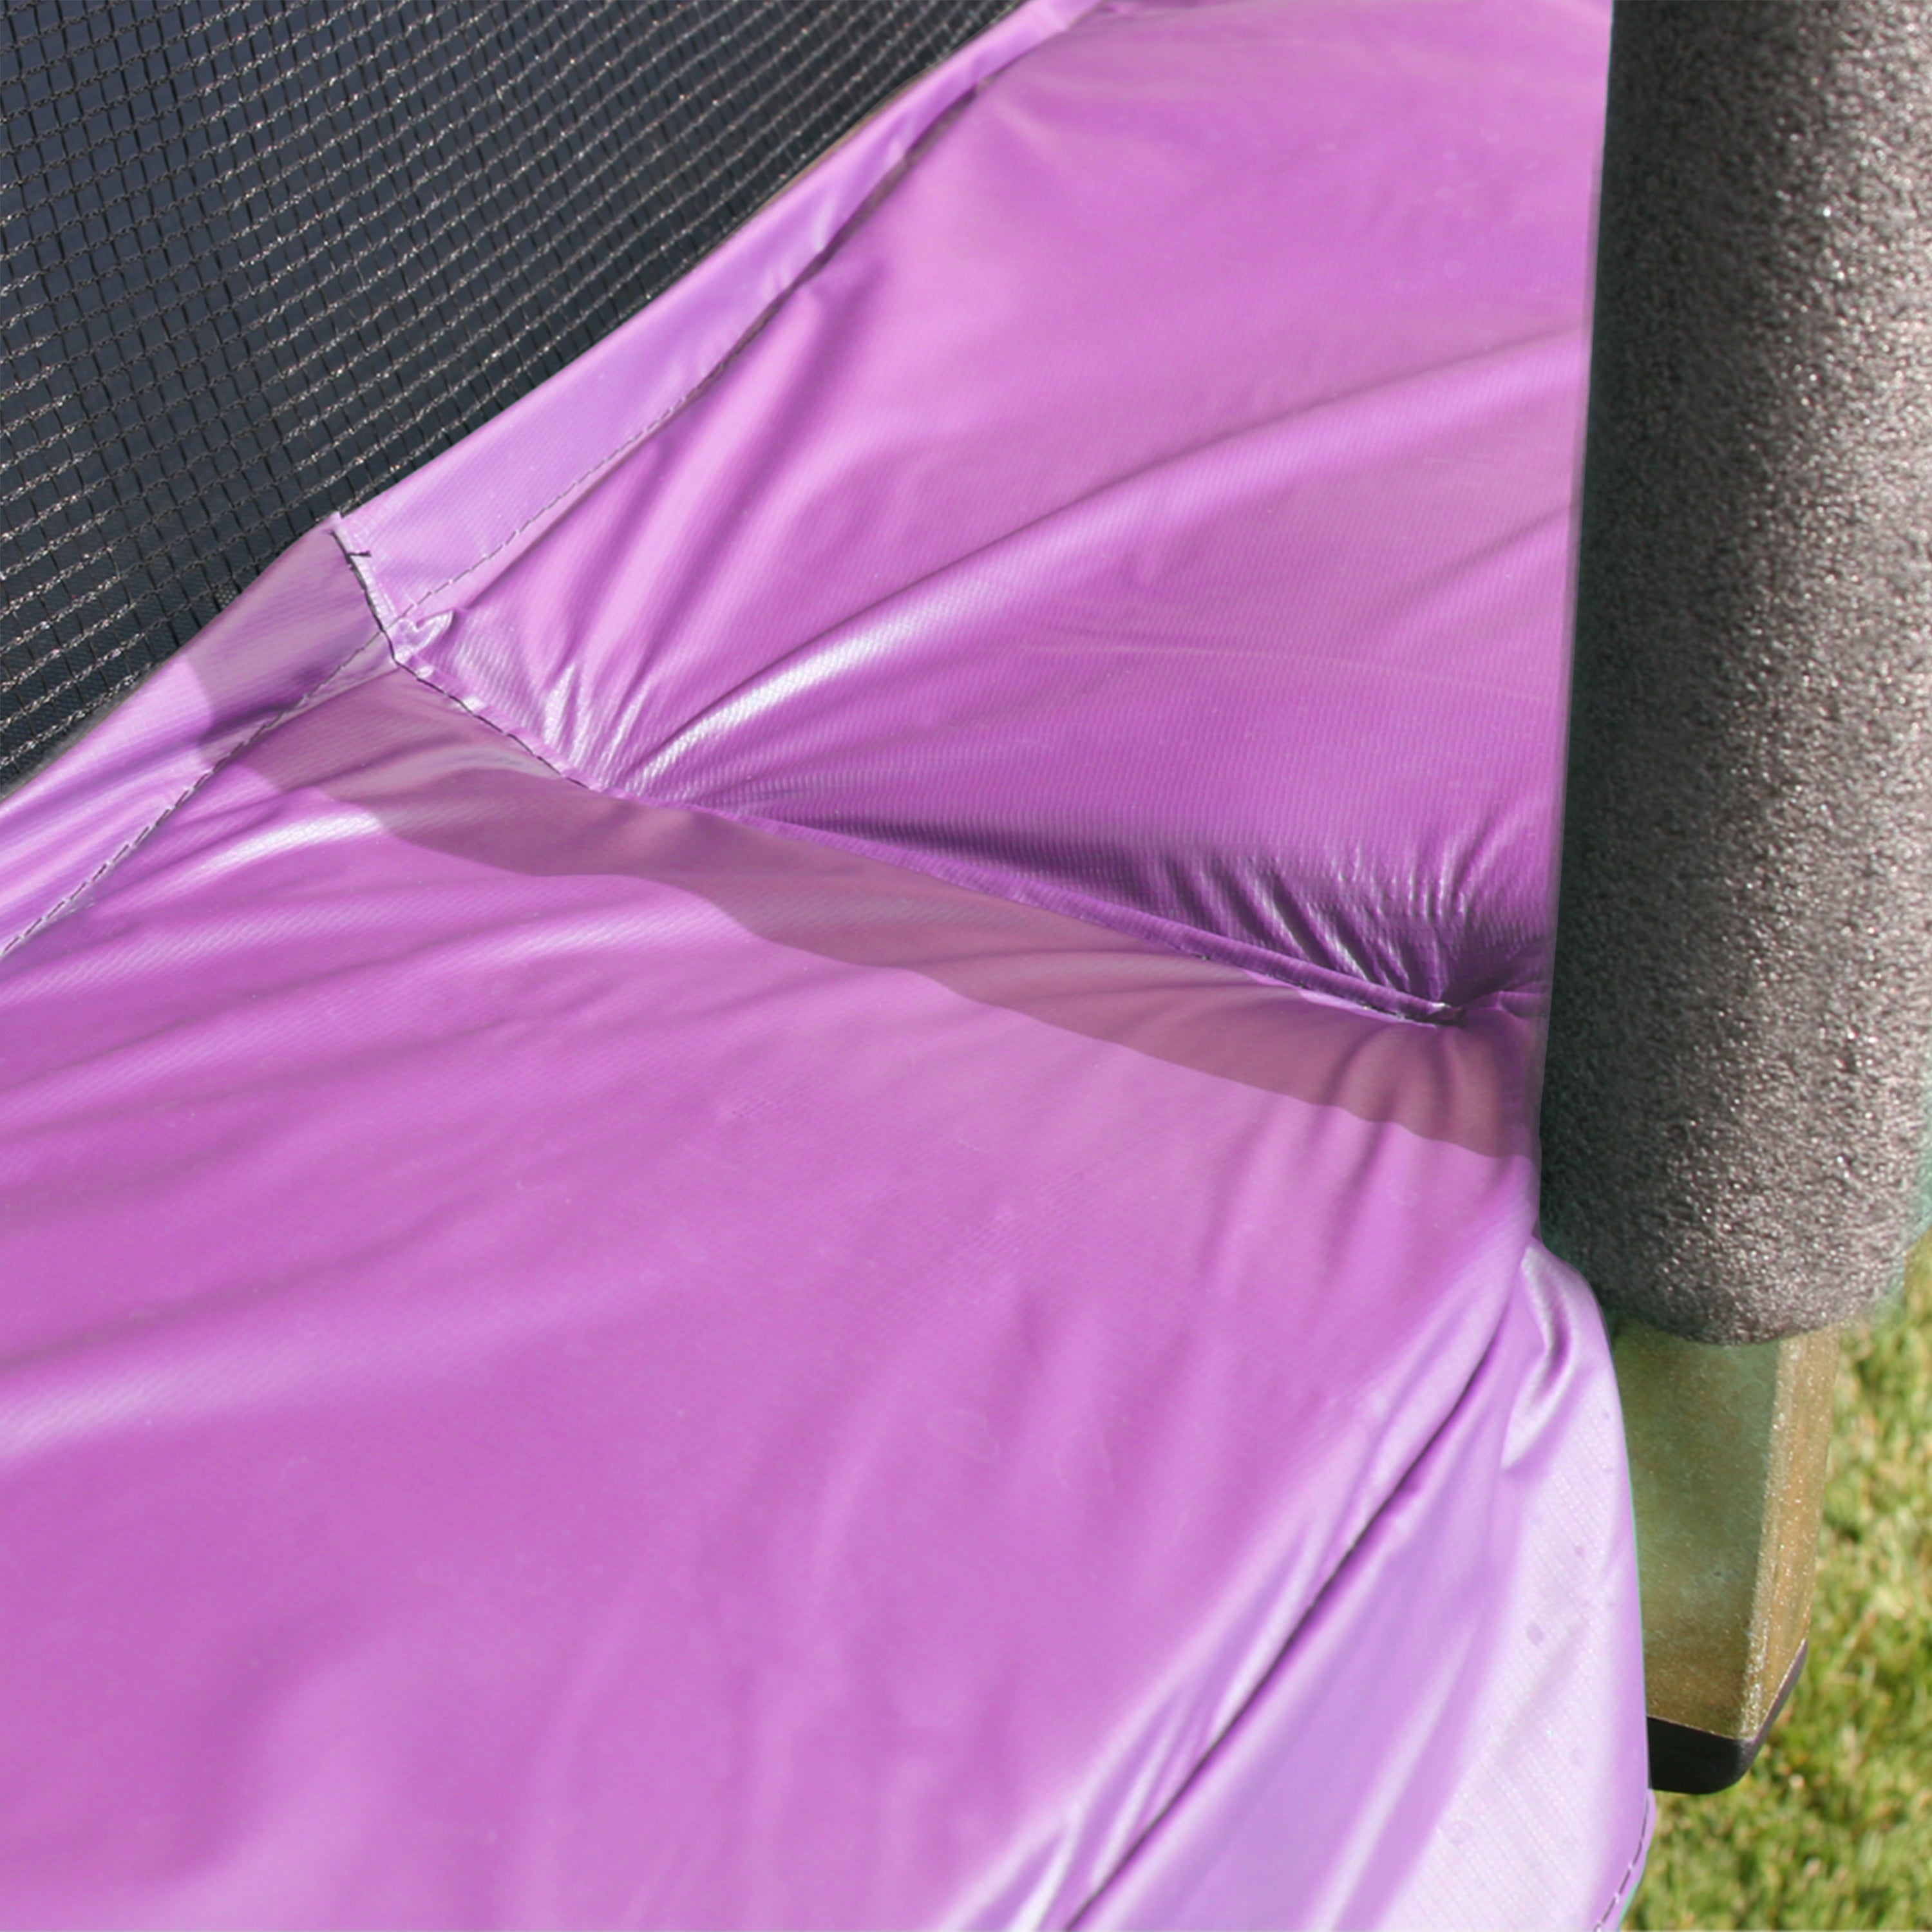 The thick, PVC spring pad is UV-resistant